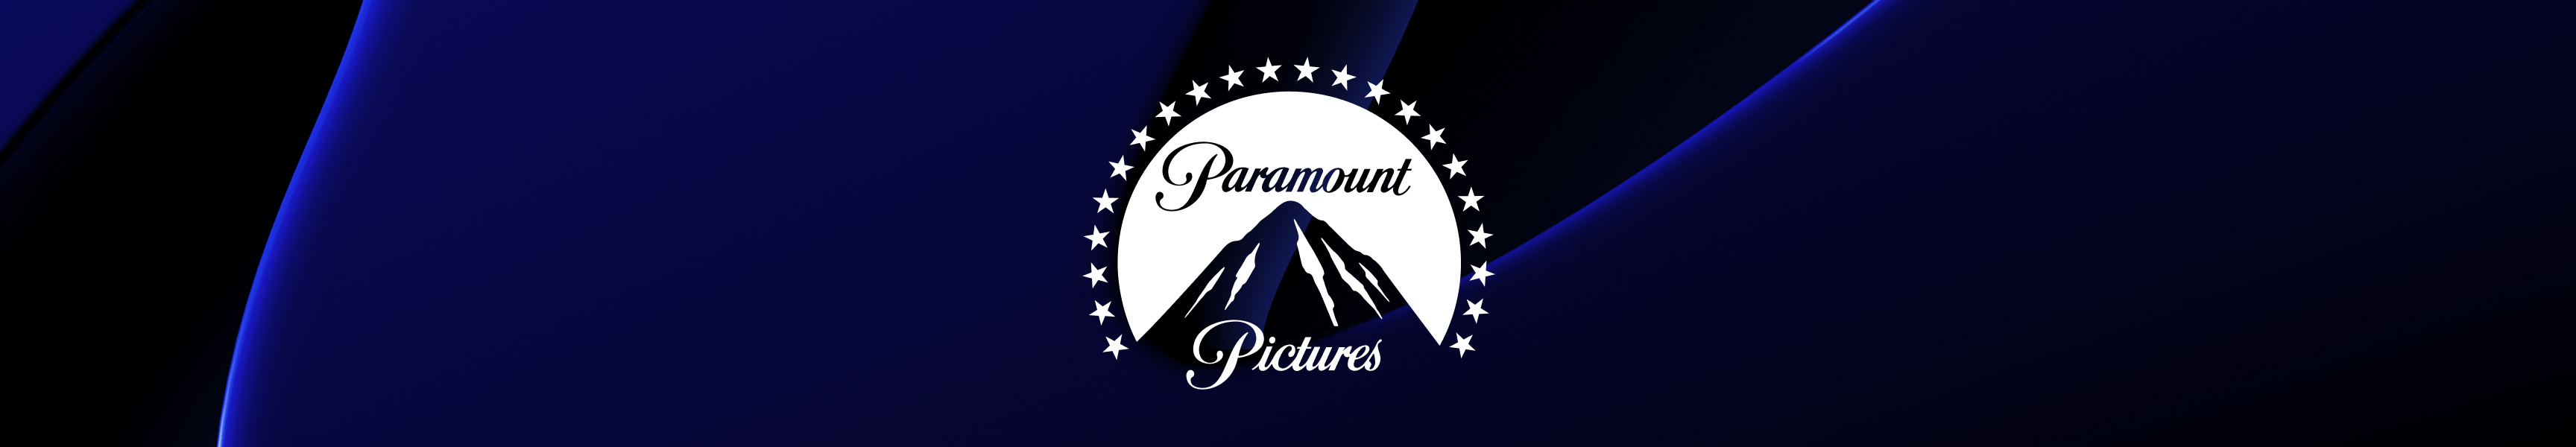 Paramount Pictures Clothing